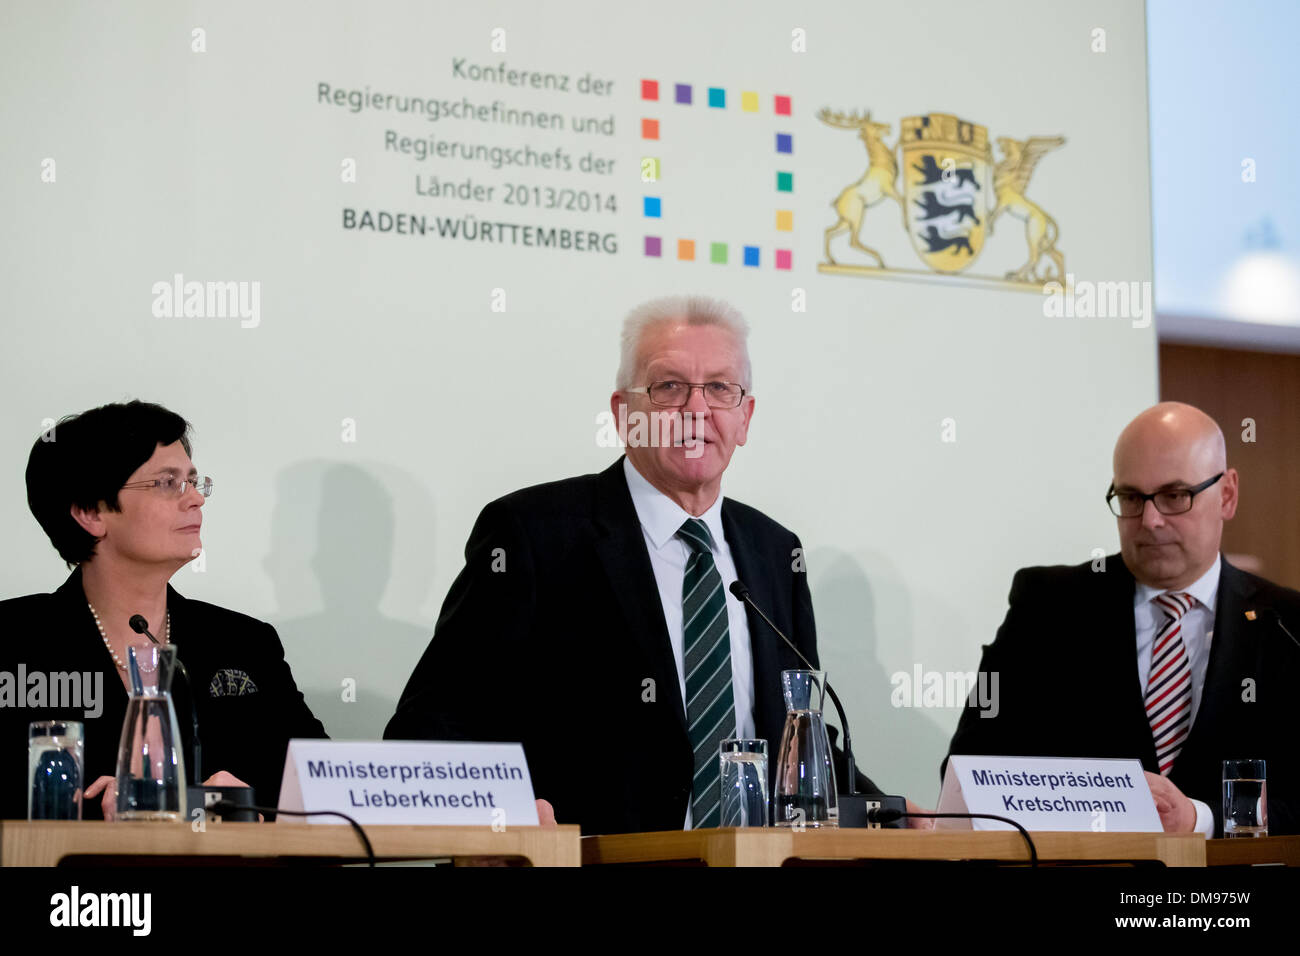 Berlin, Germany. 12th Dec, 2013. Press Conference with Prime Minister Kretschmann, Prime Minister Lieberknecht and Prime Minister Albig after Meeting/Conference of the heads of government of the Germany Federal states at the representation of Baden-Wuerttemberg in Berlin. / Picture: Christine Lieberknecht (CDU), Minister-President of ThÃƒÂ¼ringer, Winfried Kretschmann (Green), Old President of the Conference of Prime Ministers and Minister-President of Baden-WÃƒÂ¼rttemberg, and Torsten Albig (SPD), Minister-President of Schleswig-Holstein, in Berlin, on December 12, 2013.Photo: Reynaldo Pag Stock Photo